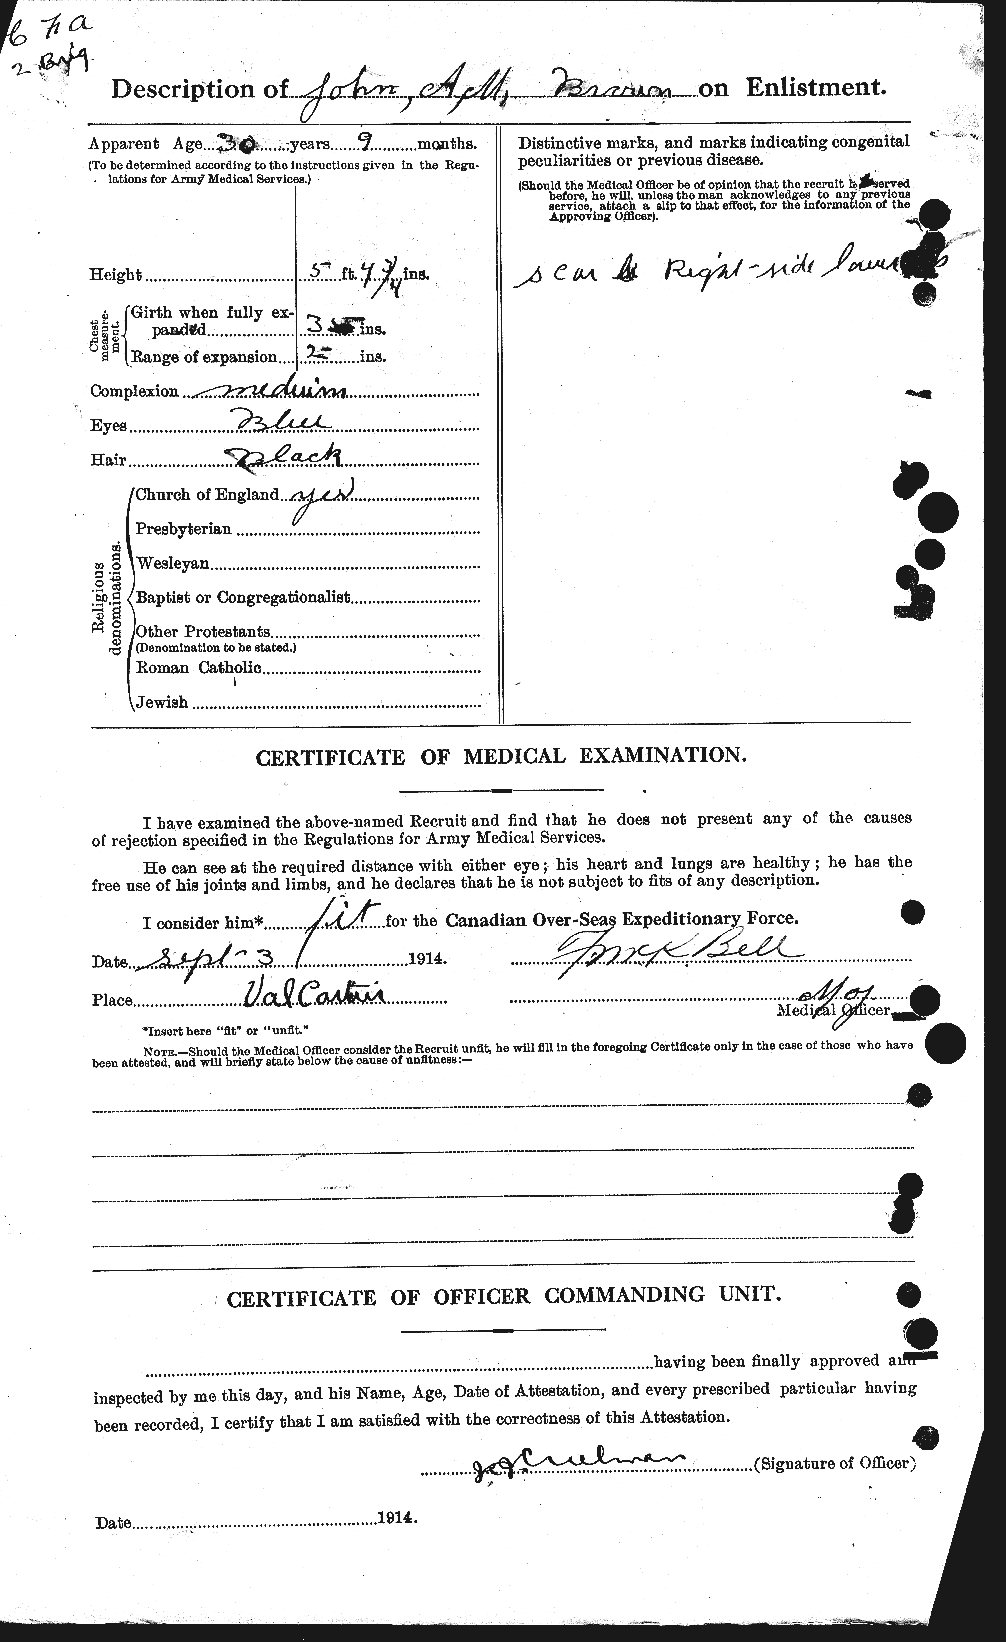 Personnel Records of the First World War - CEF 264560b